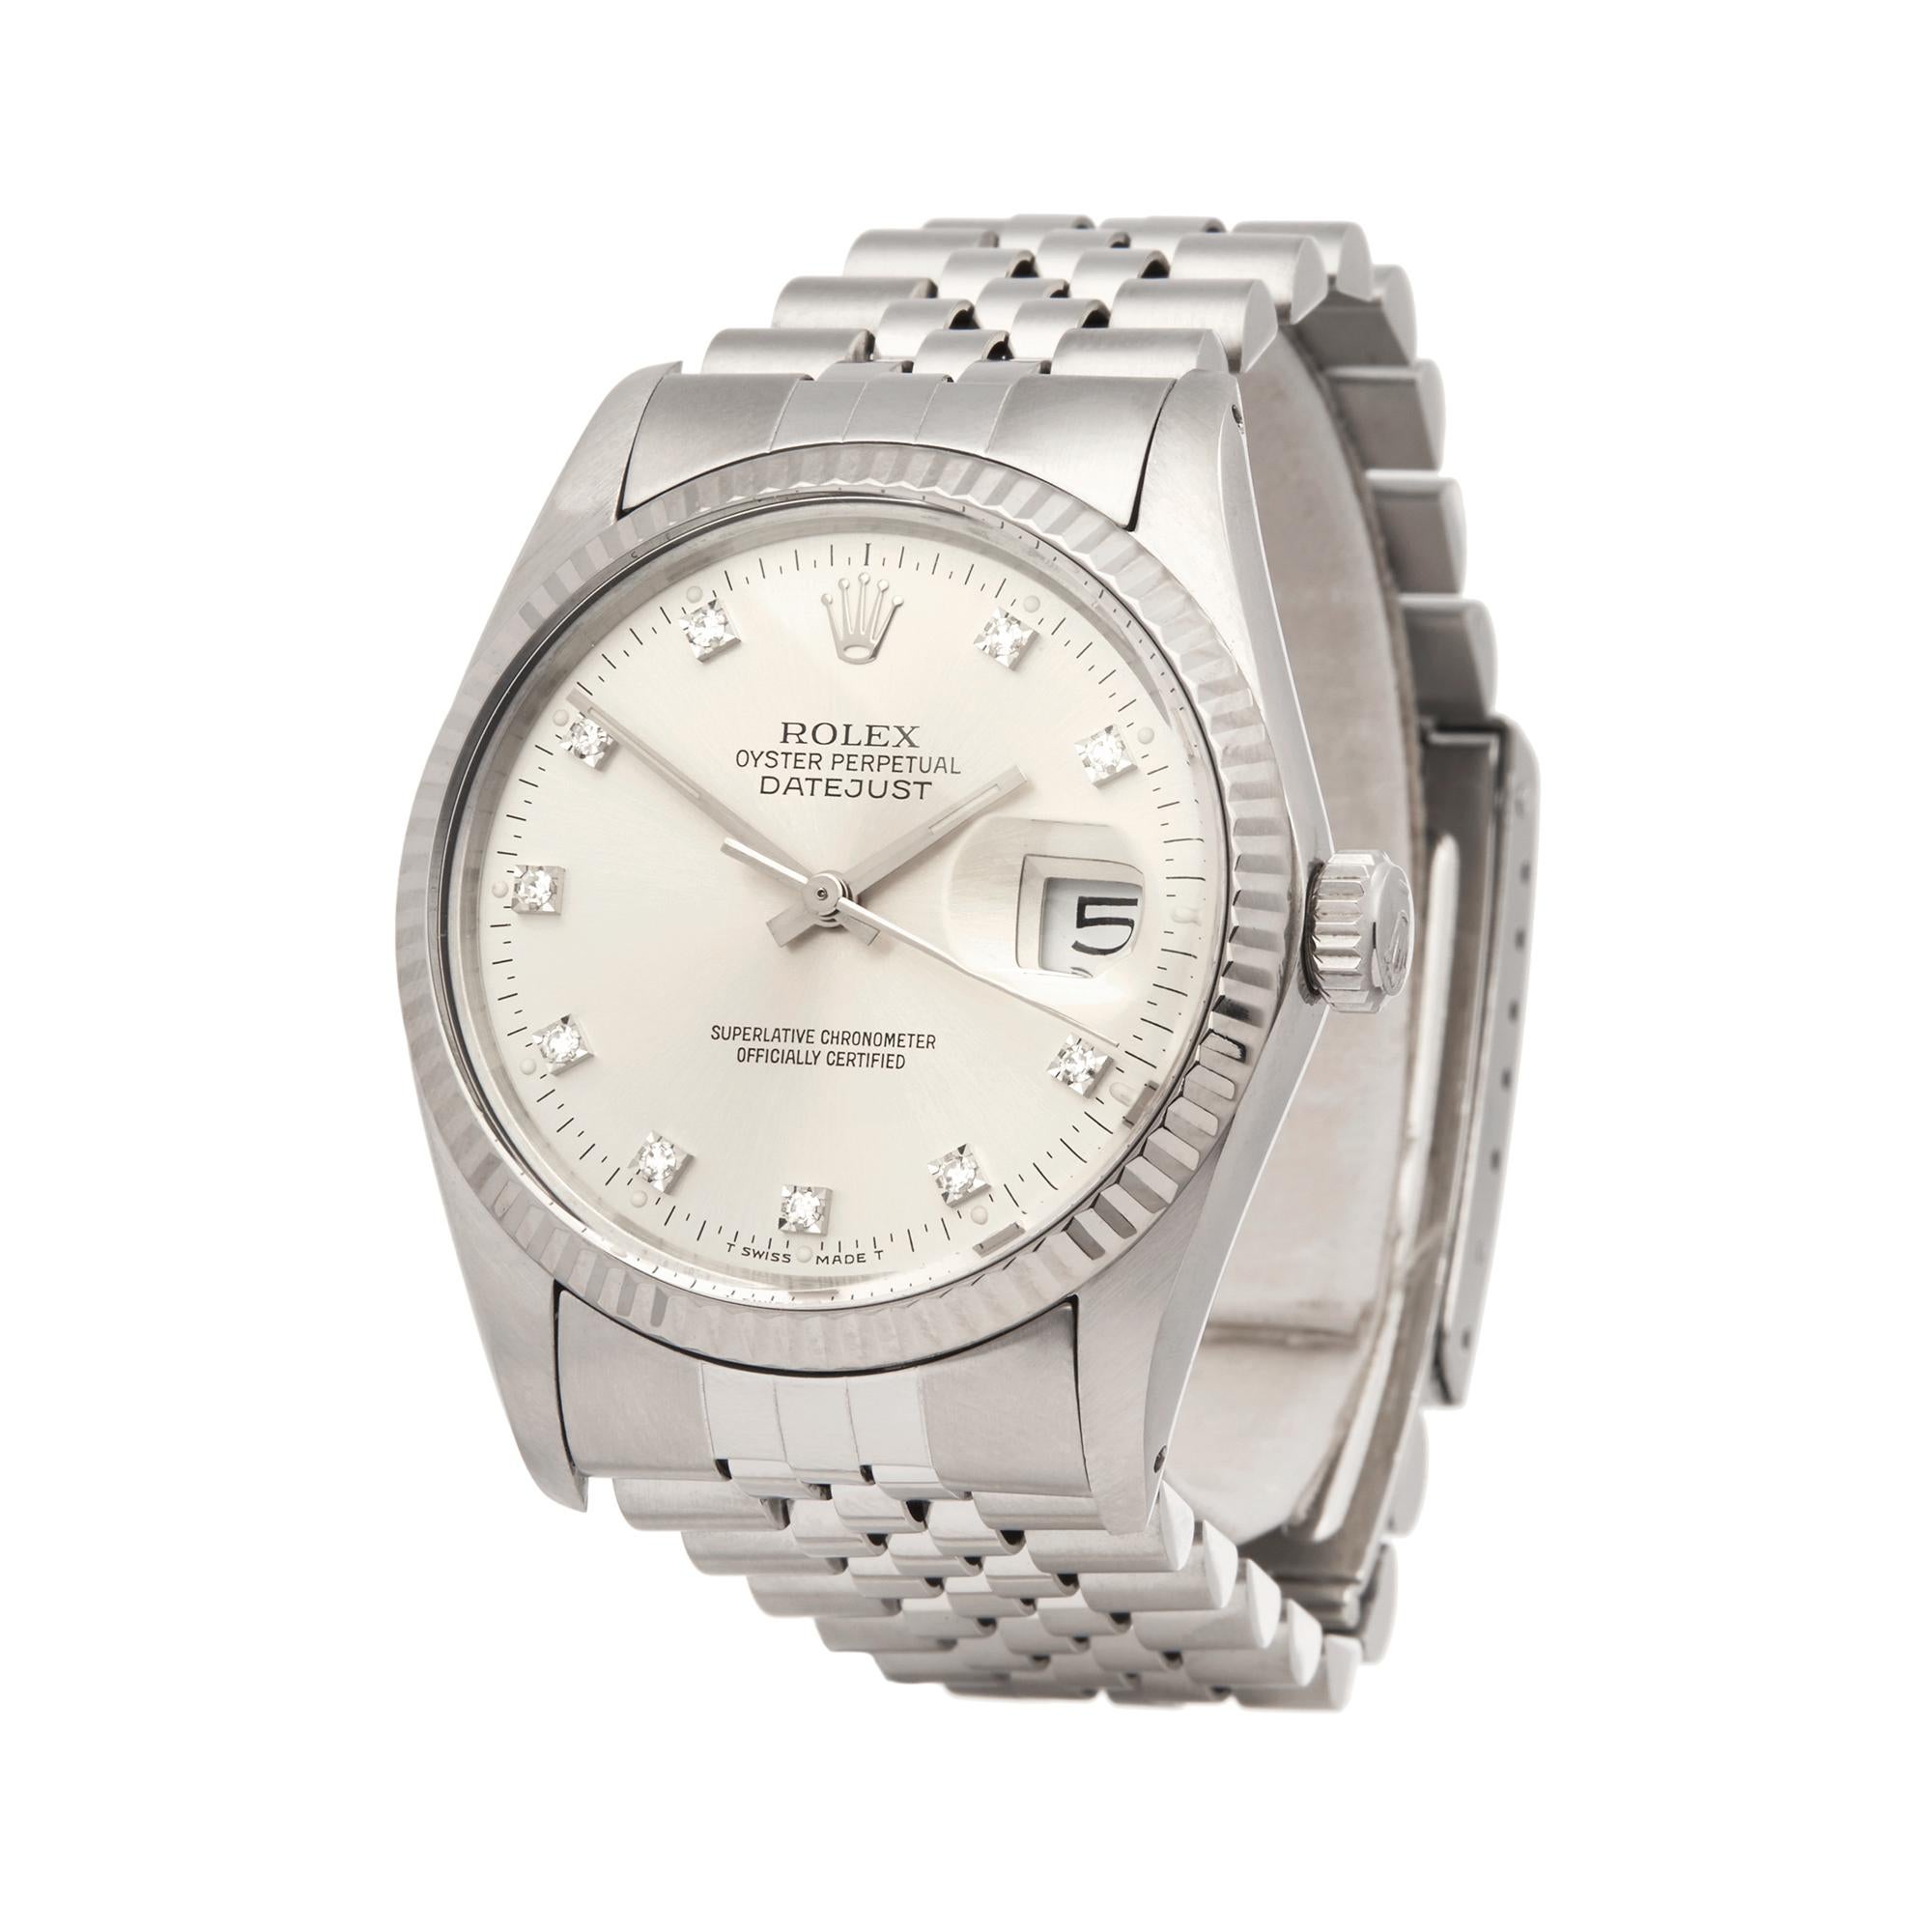 Reference: W5705
Manufacturer: Rolex
Model: Datejust
Model Reference: 16014
Age: Circa 1984
Gender: Men's
Box and Papers: Box Only
Dial: Silver Diamonds
Glass: Plexiglass
Movement: Automatic
Water Resistance: To Manufacturers Specifications
Case: